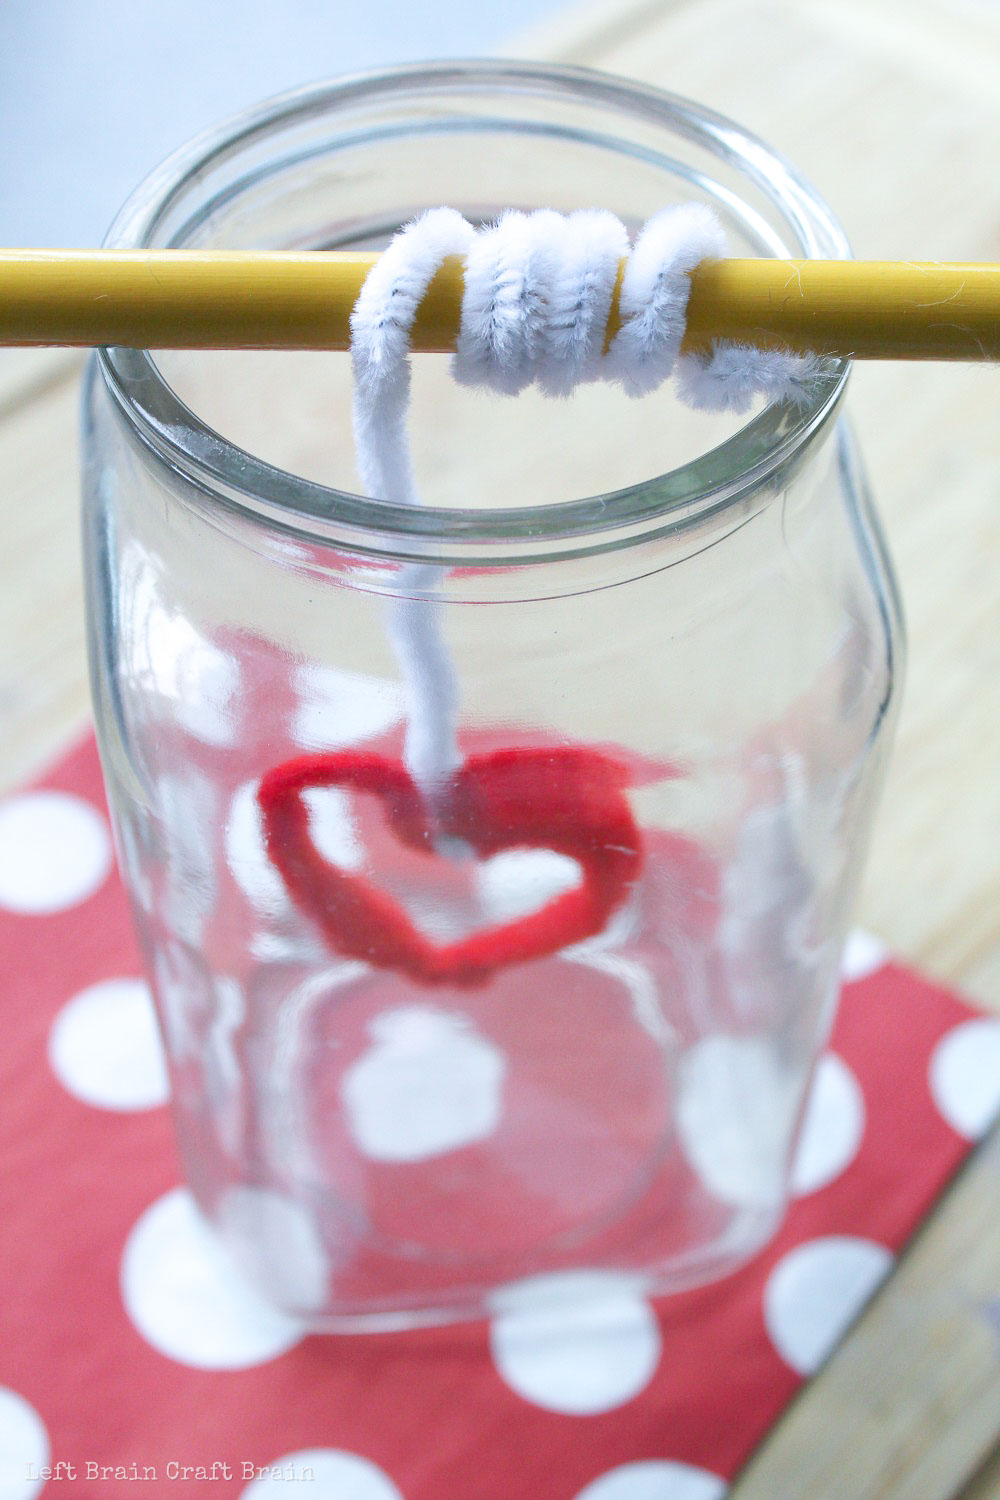 Drop the pipe cleaner heart into a jar